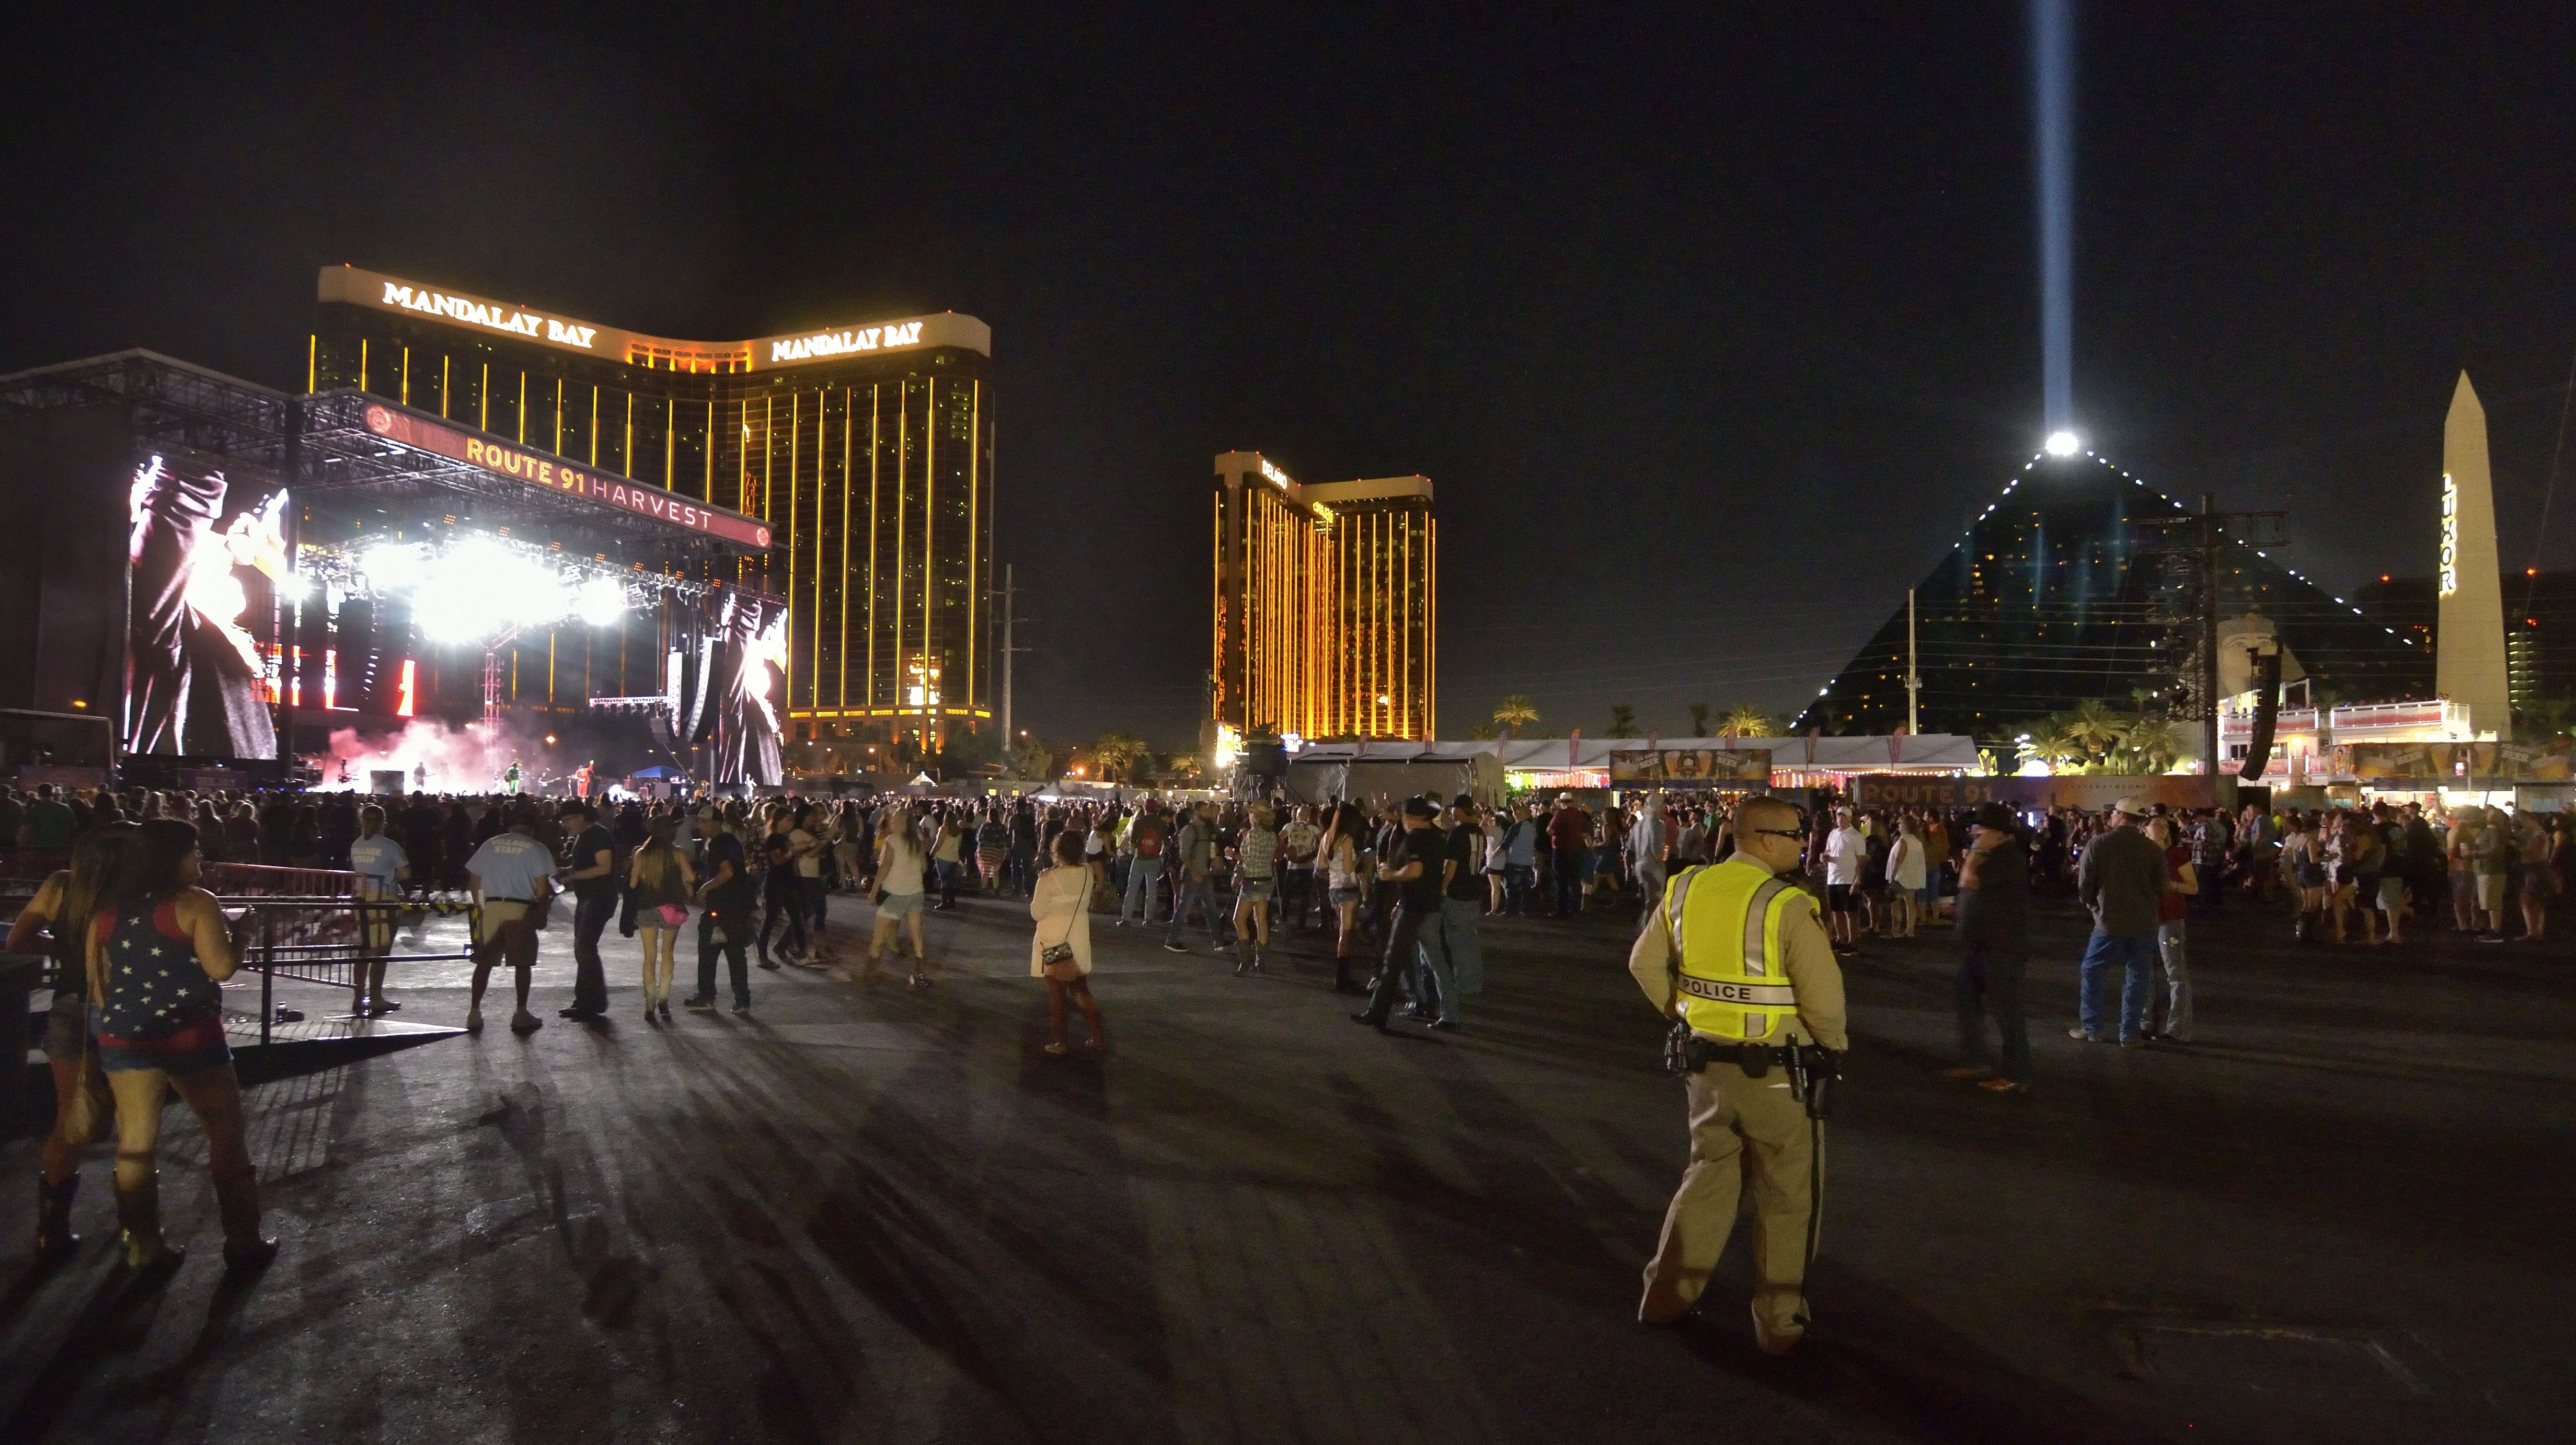 epa06239553 A handout photo made available by the Las Vegas News Bureau on 02 October showing the scene at the Route 91 Harvest festival on Las Vegas Boulevard South in Las Vegas 30 September, 2017. Reports indicate that late at night on 01 October during the second night of the festival that a gunman opened fire from the Mandalay Bay hotel (L) into crowds at the festival.  EPA/Bill Hughes/Las Vegas News Bureau/ HANDOUT MANDATORY CREDIT, HANDOUT EDITORIAL USE ONLY/NO SALES/NO ARCHIVES